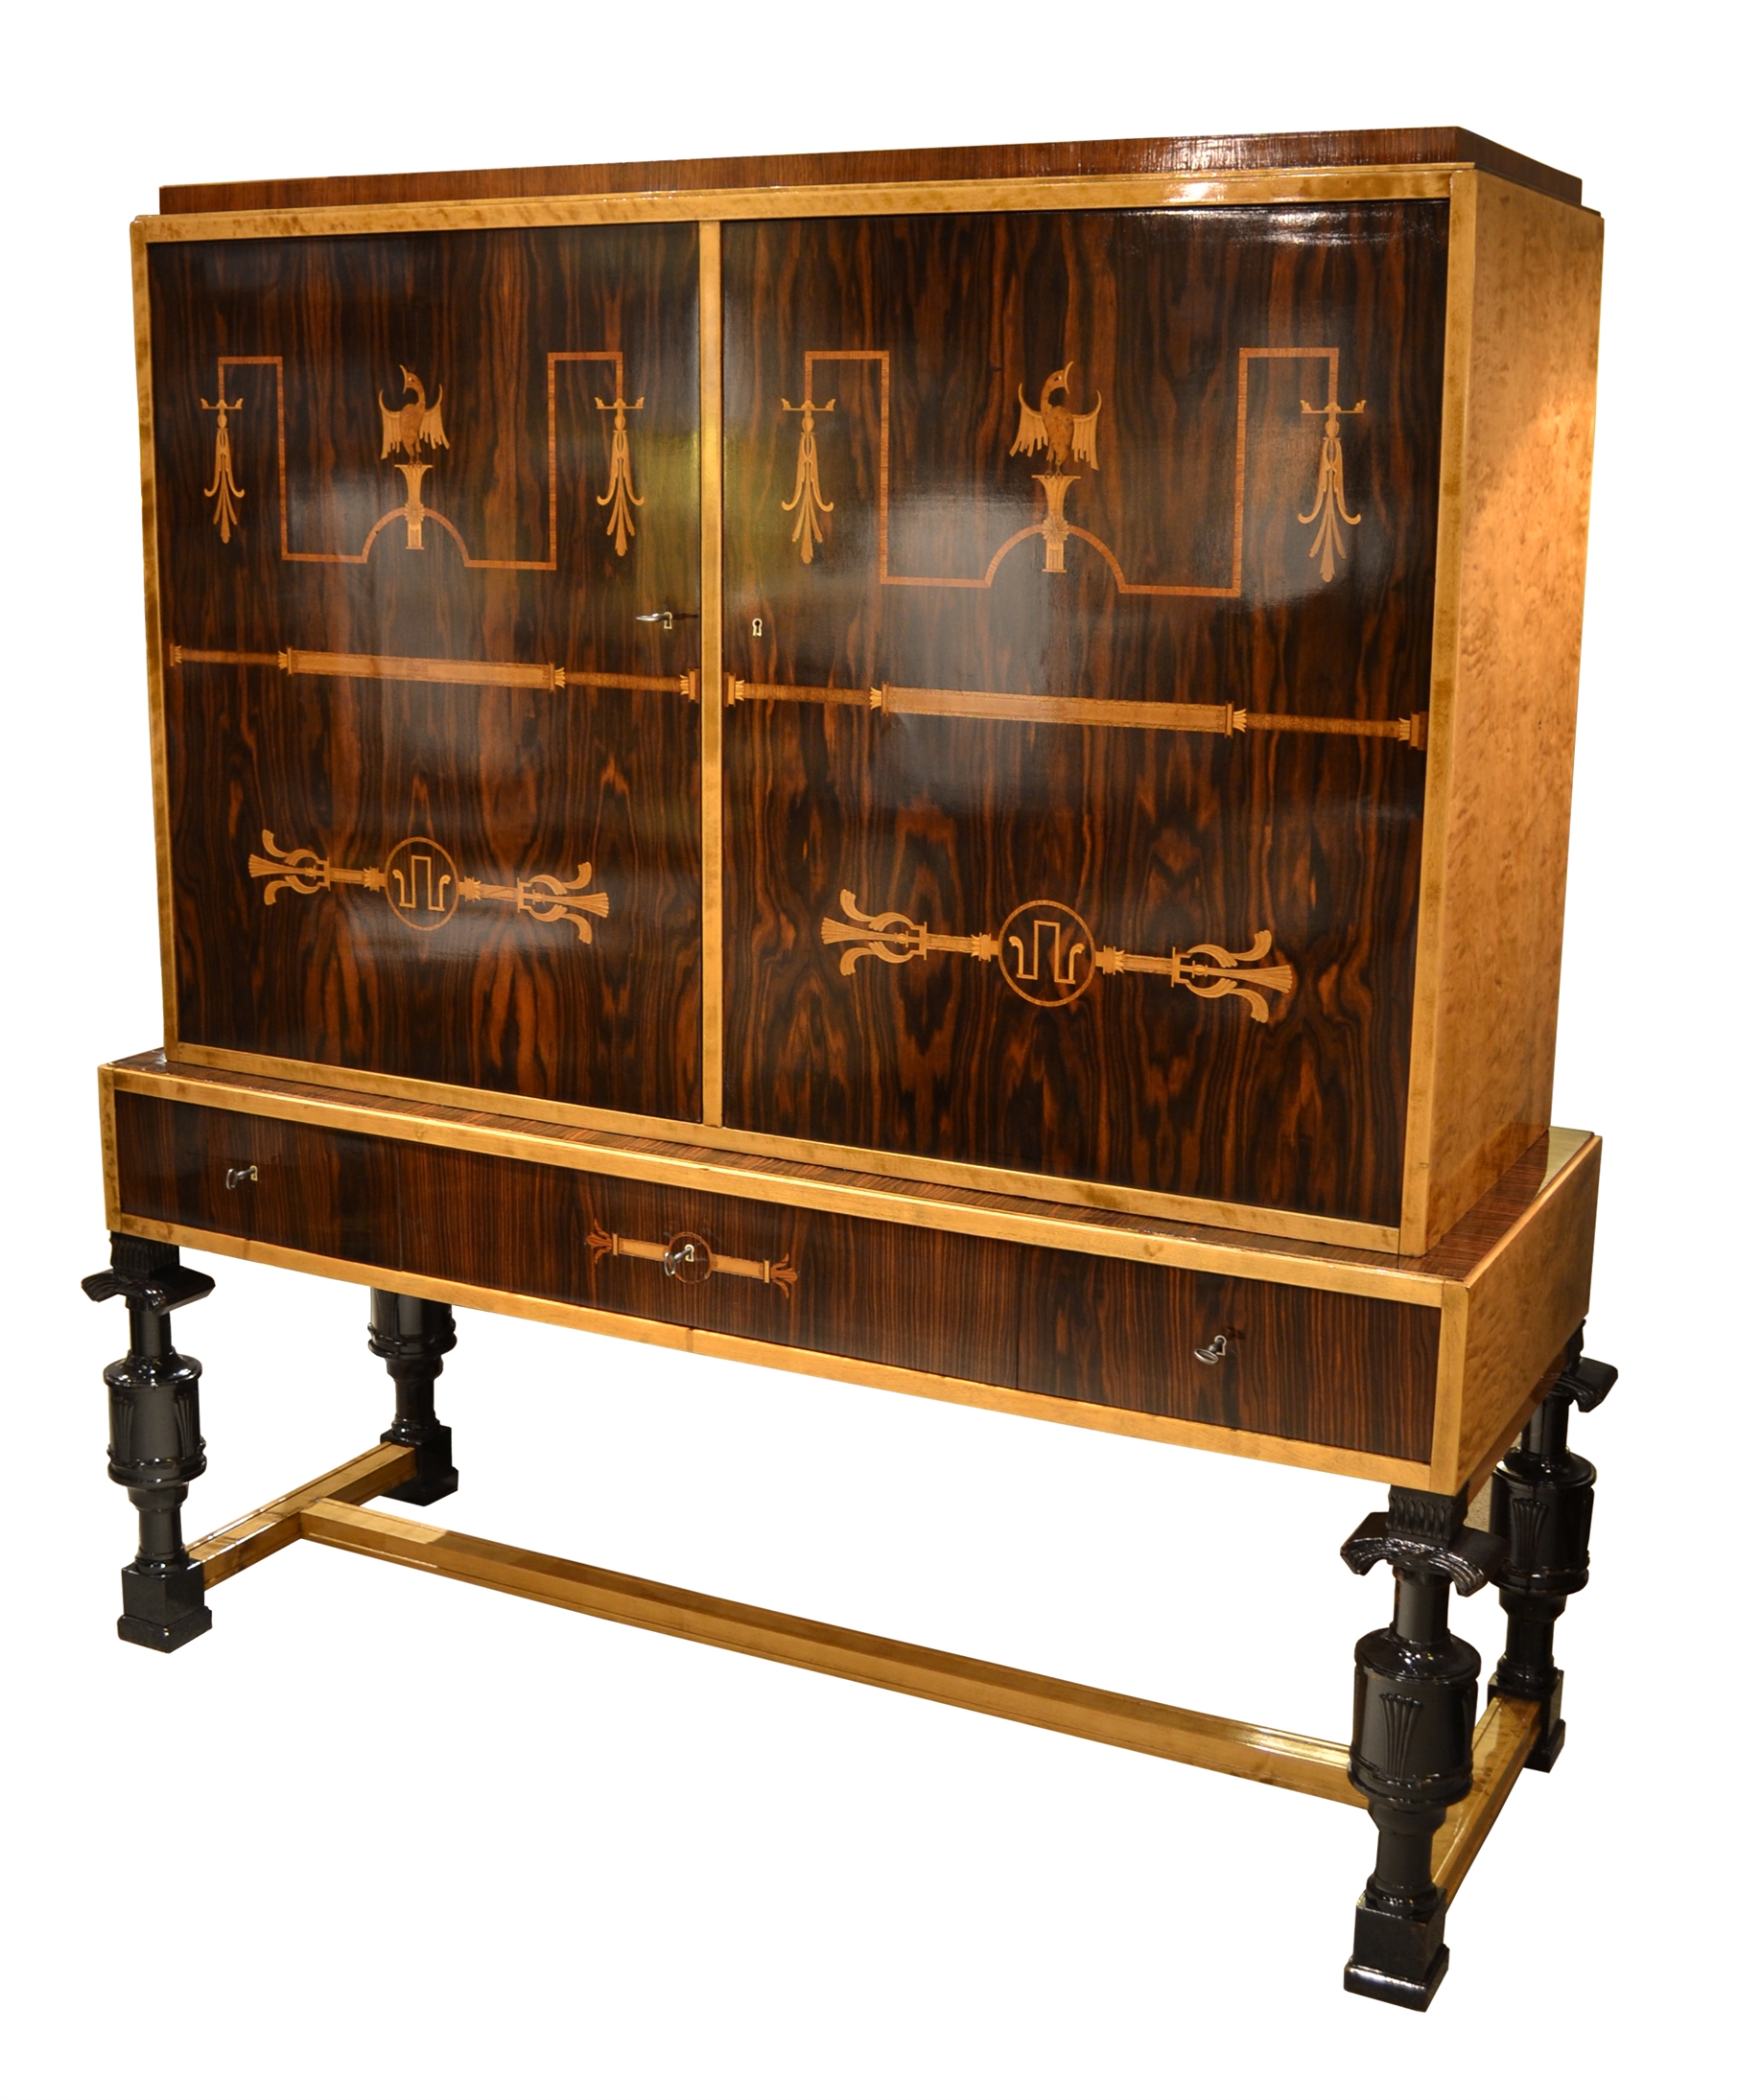 125/2030 - Carl Malmsten Cabinet on Stand